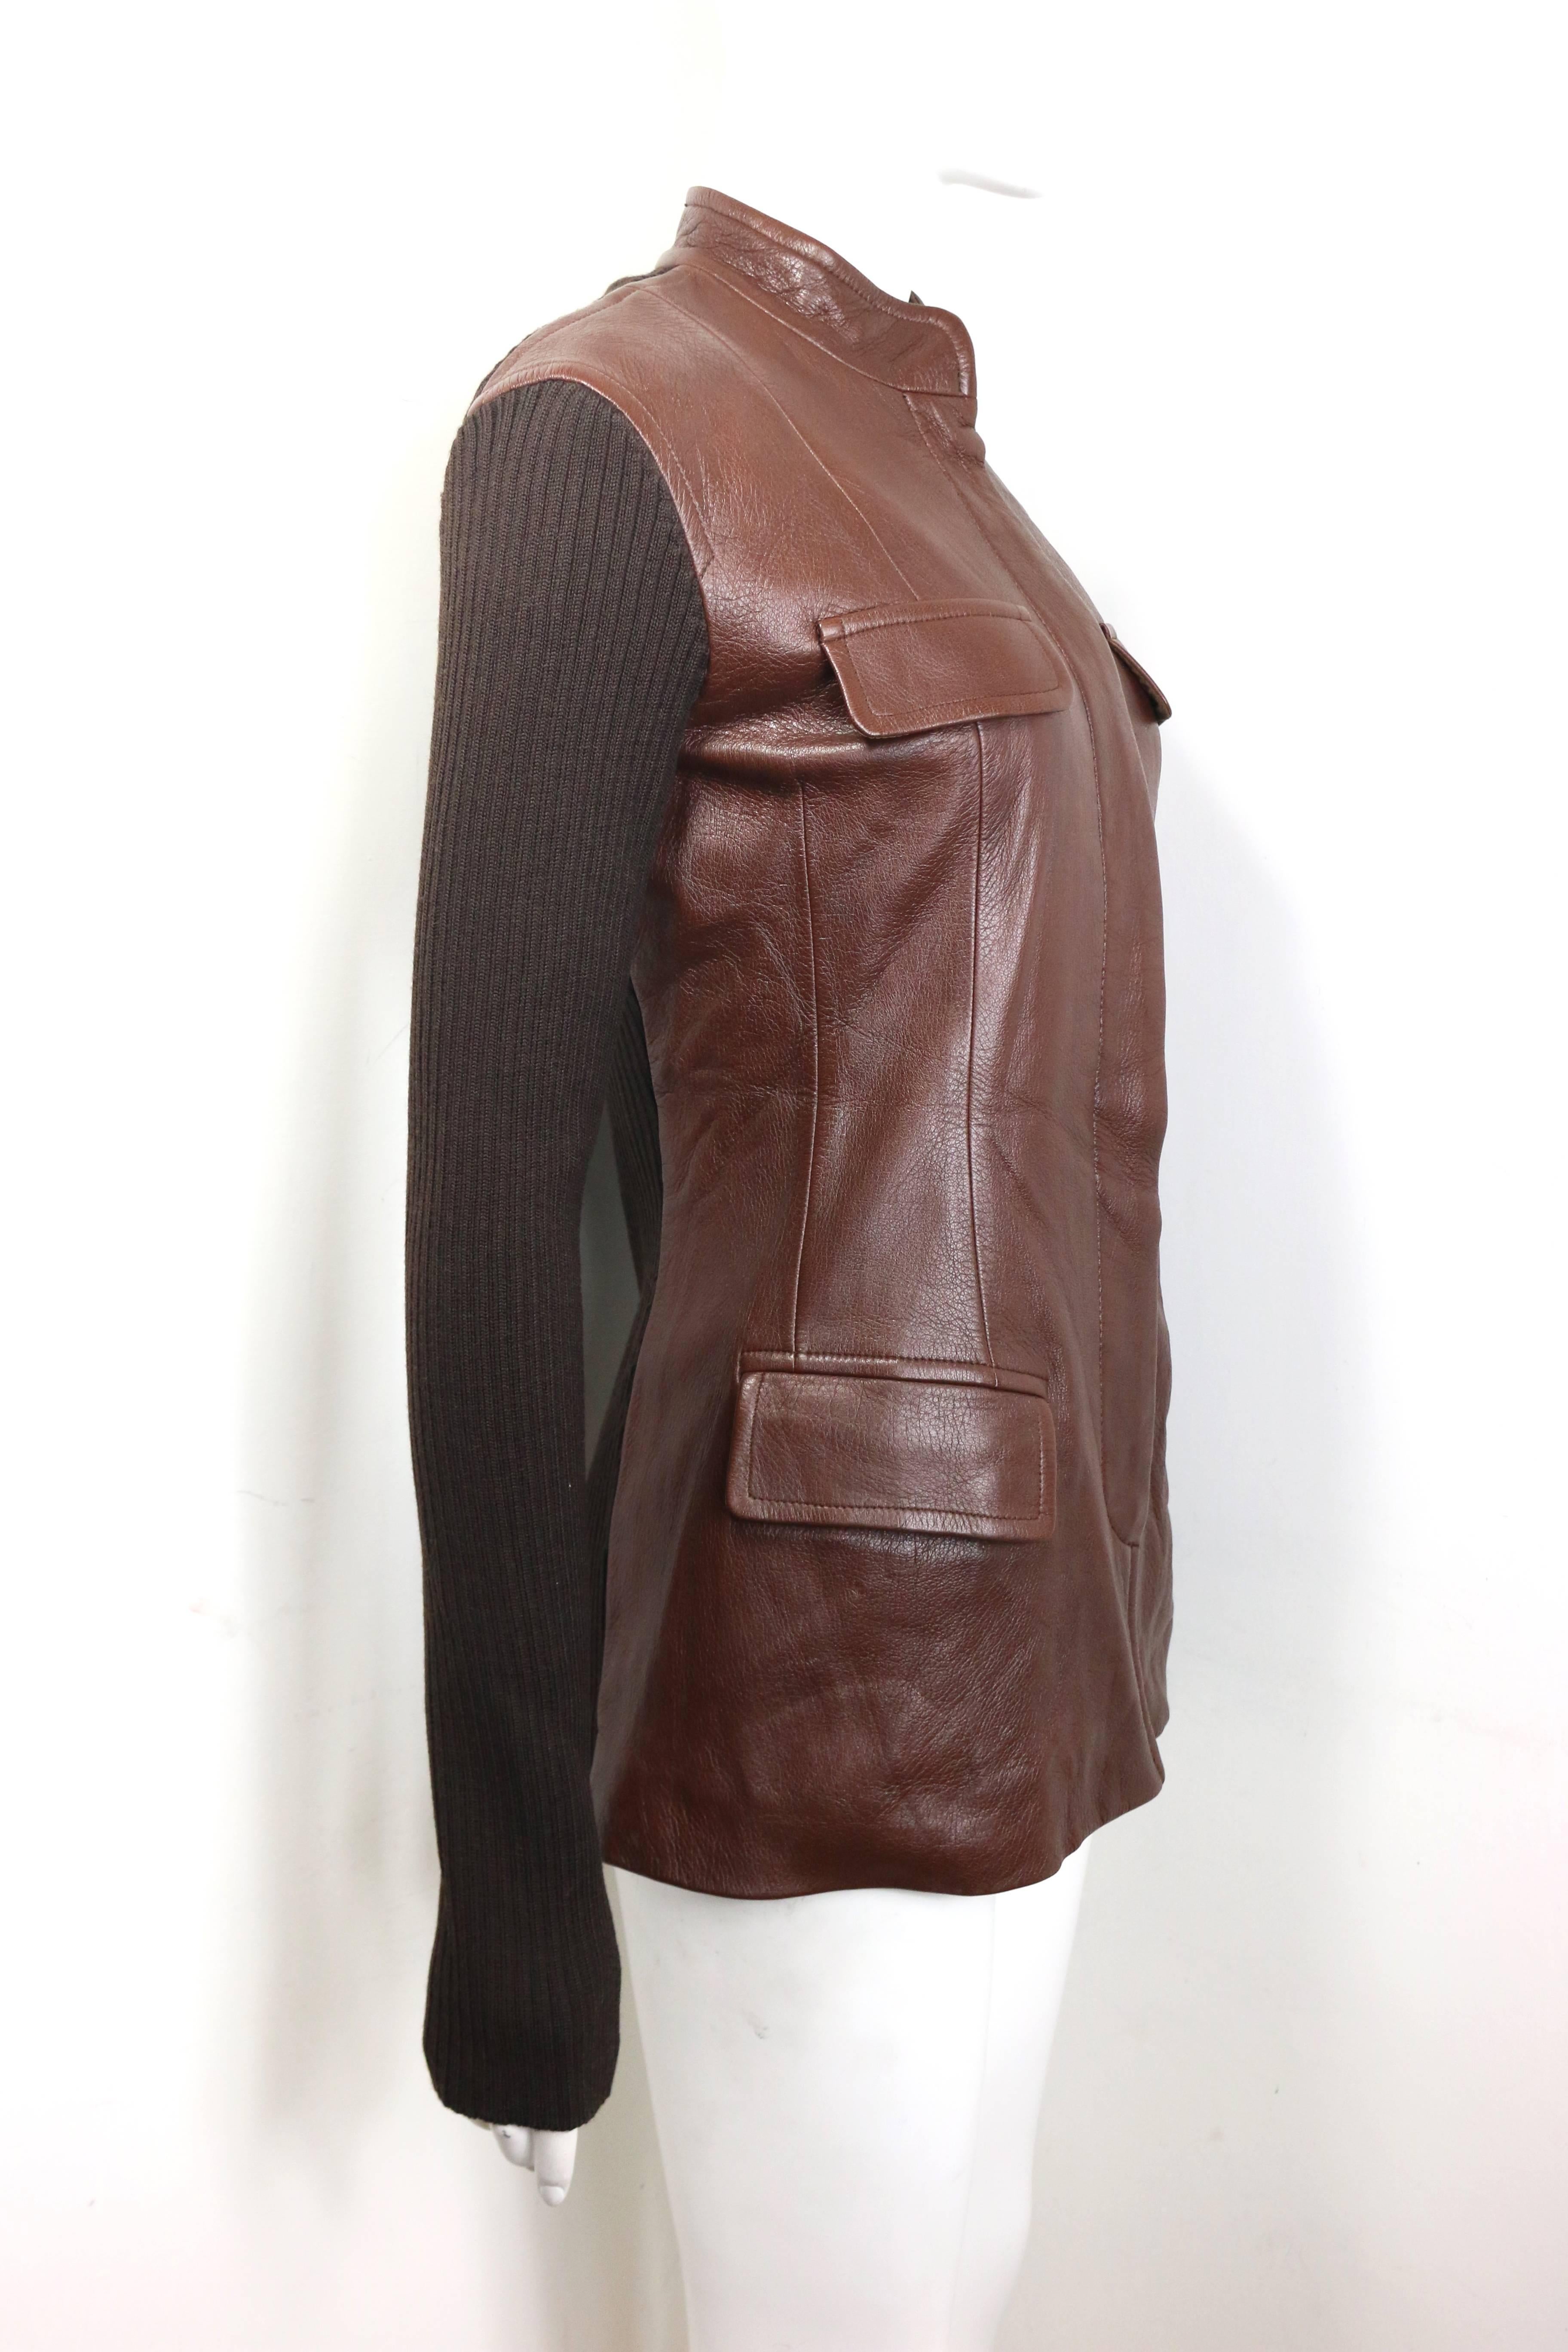 - Vintage 90s Donna Karan brown bi fabric leather and knitted wool sleeves jacket. 

- Featuring a mandarin collar and buttons closure. 

- Two decorative flaps on the bust area. 

- Two flap pockets. 

- Size M. 

- 100% Leather and Merino Wool.